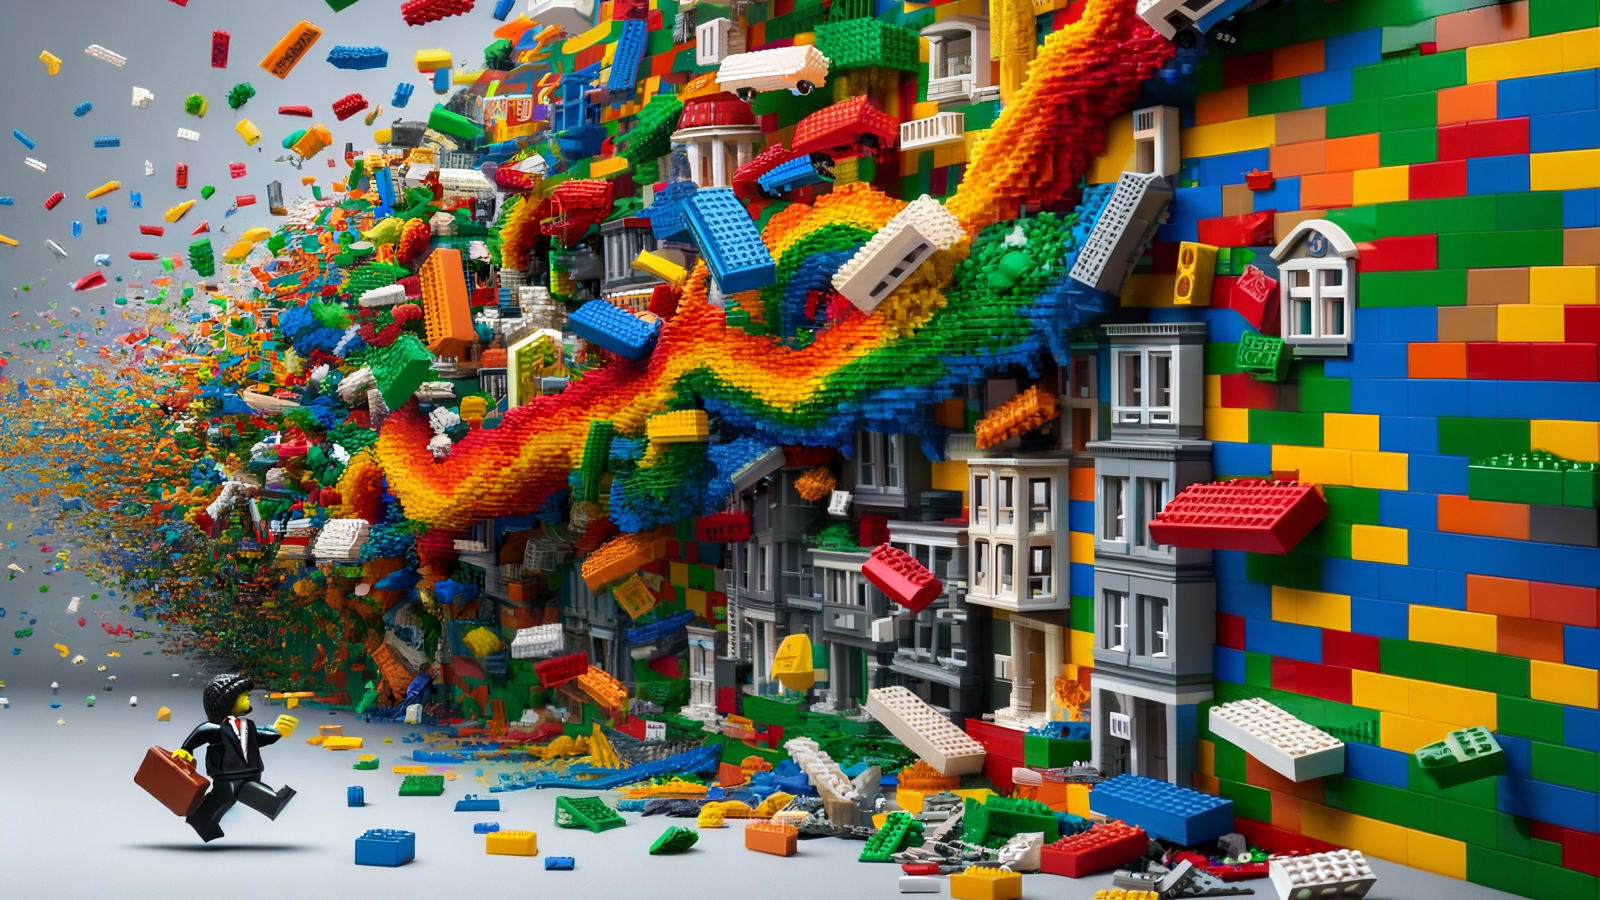 Brick-by-Brick: Art in the City